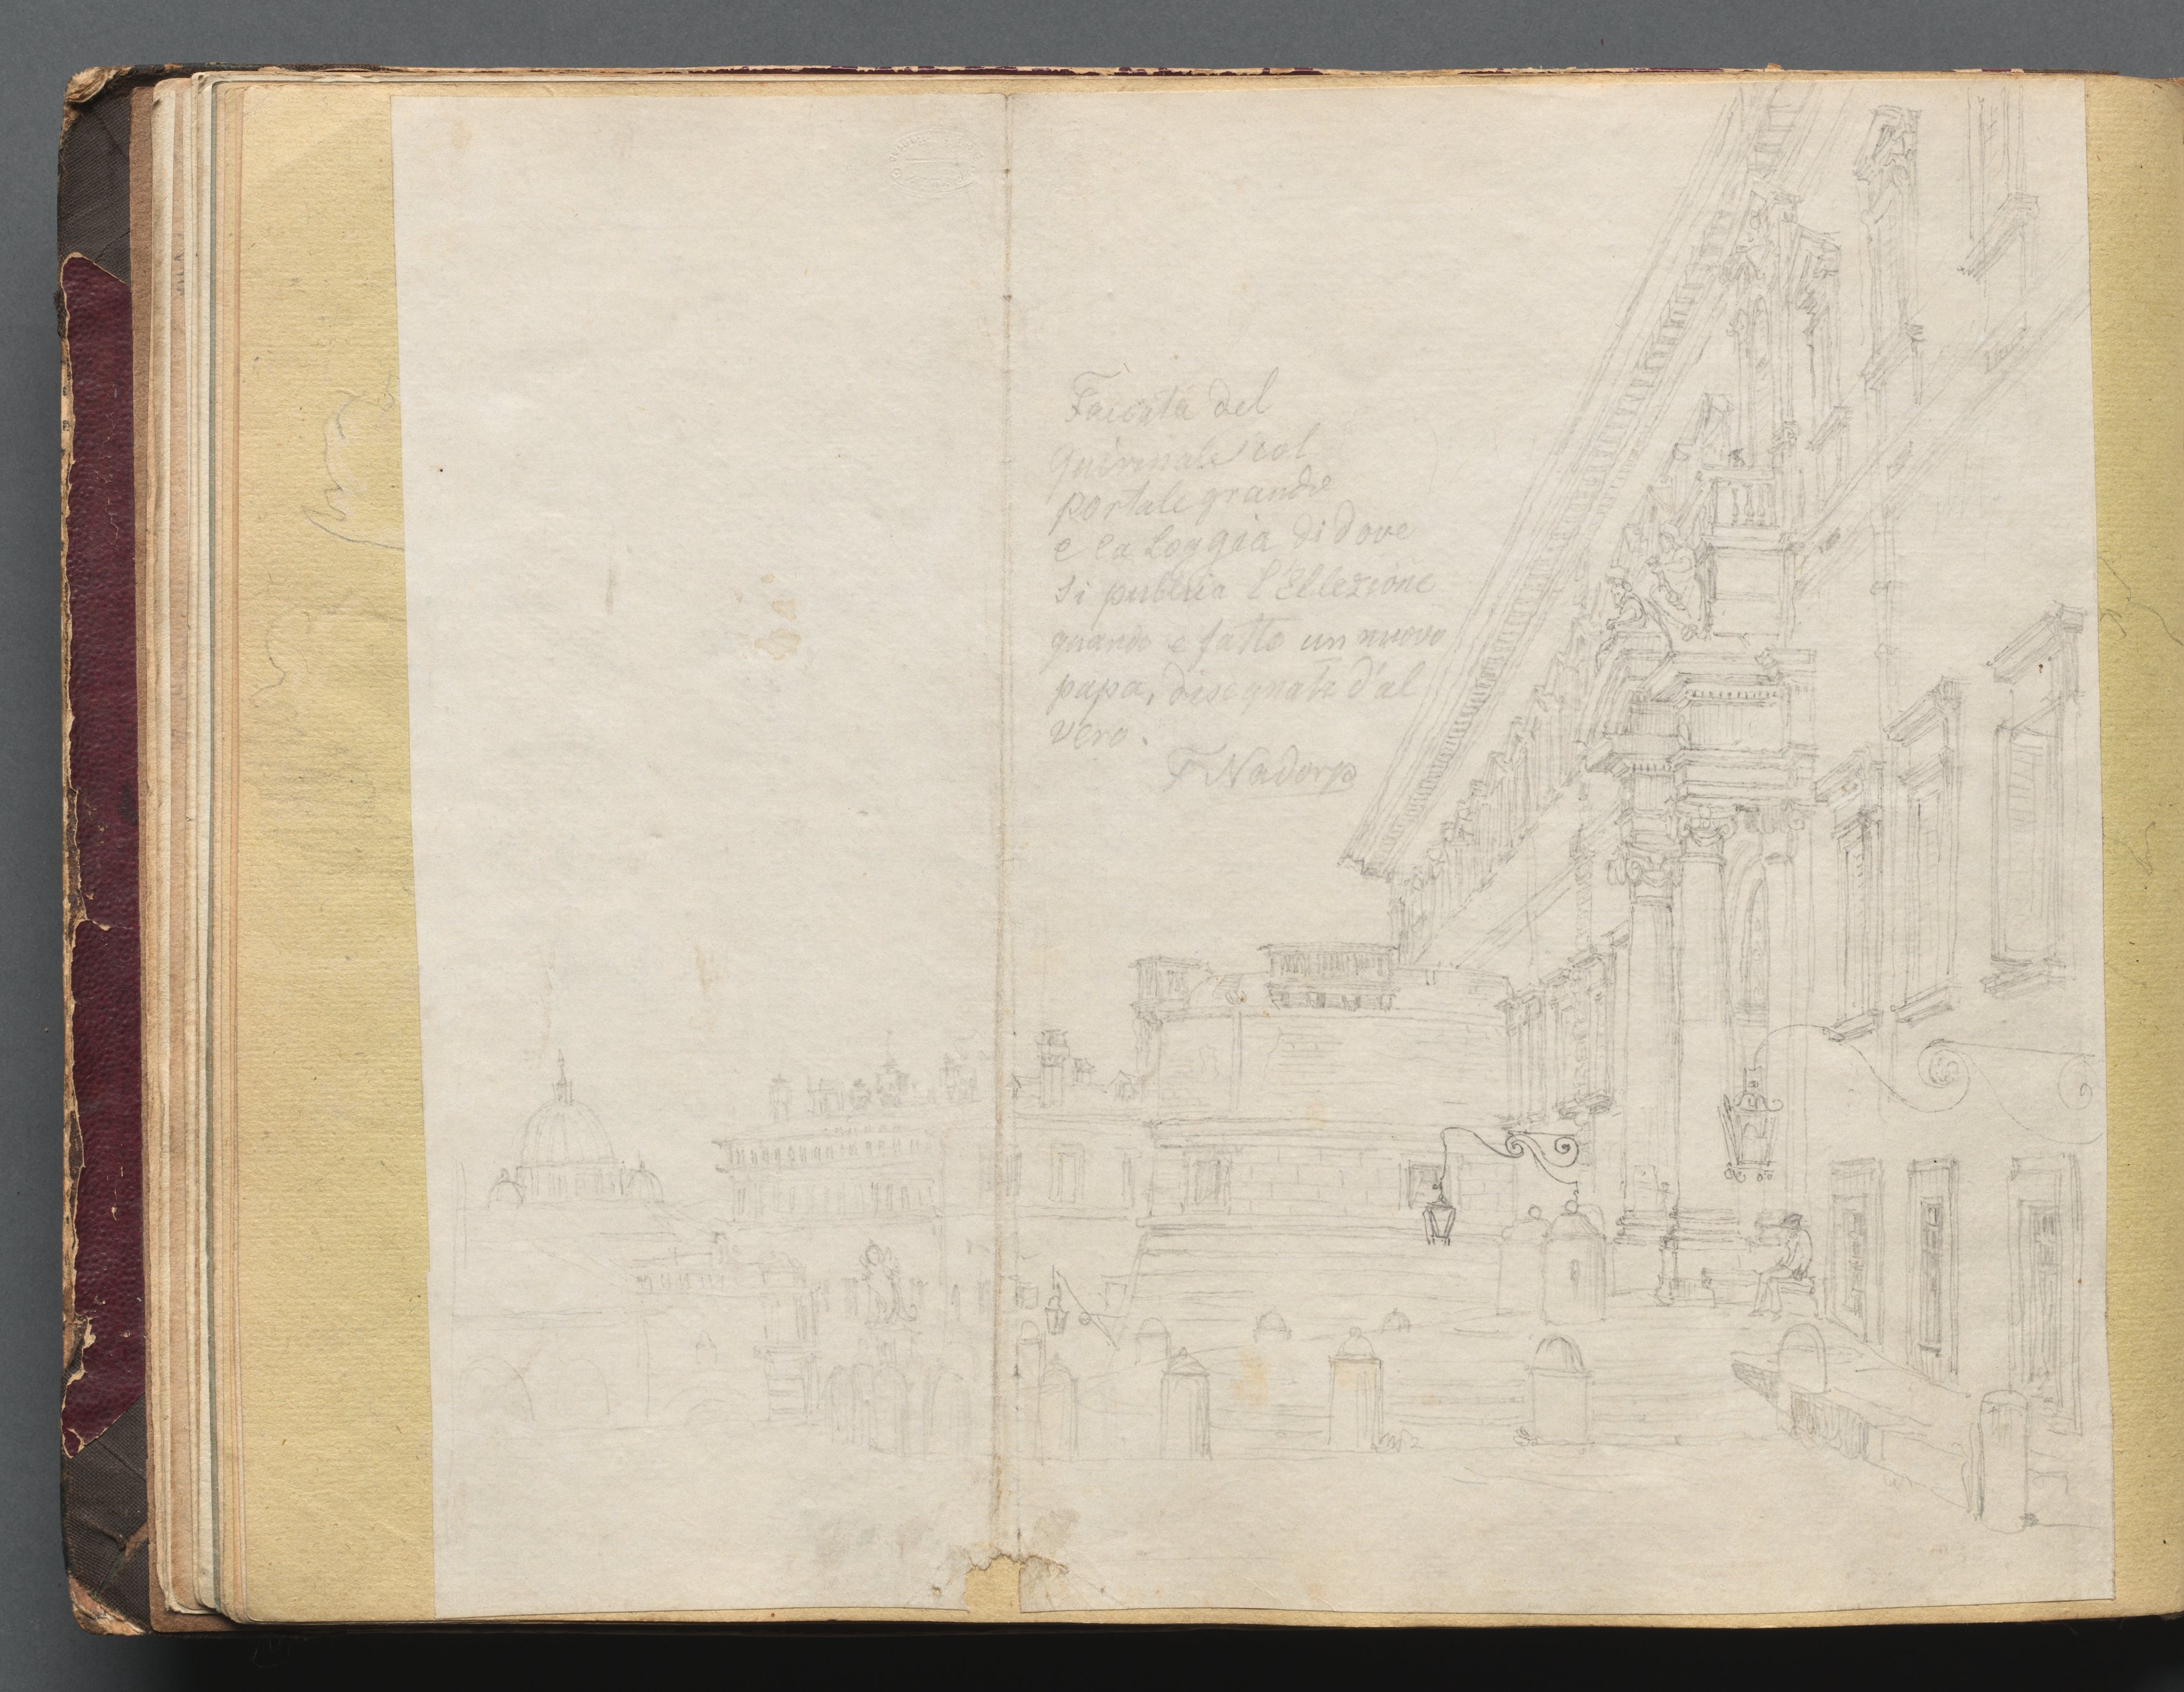 Album with Views of Rome and Surroundings, Landscape Studies, page 15b: Roman Architectural View